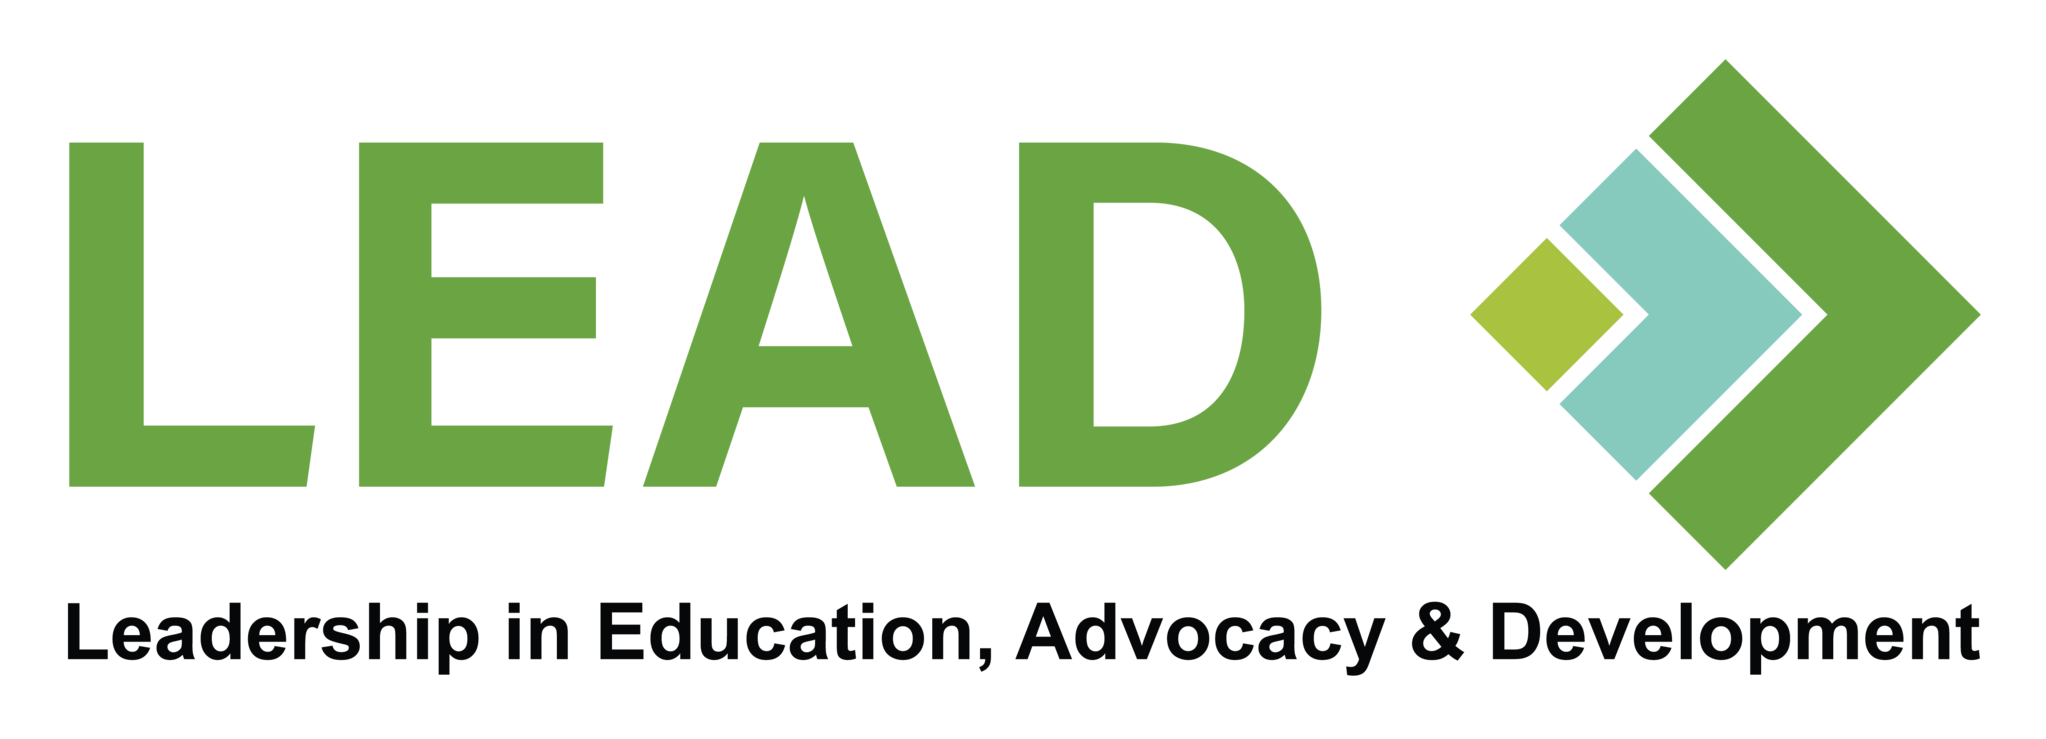 LEAD Leadership in Education, Advocacy and Development